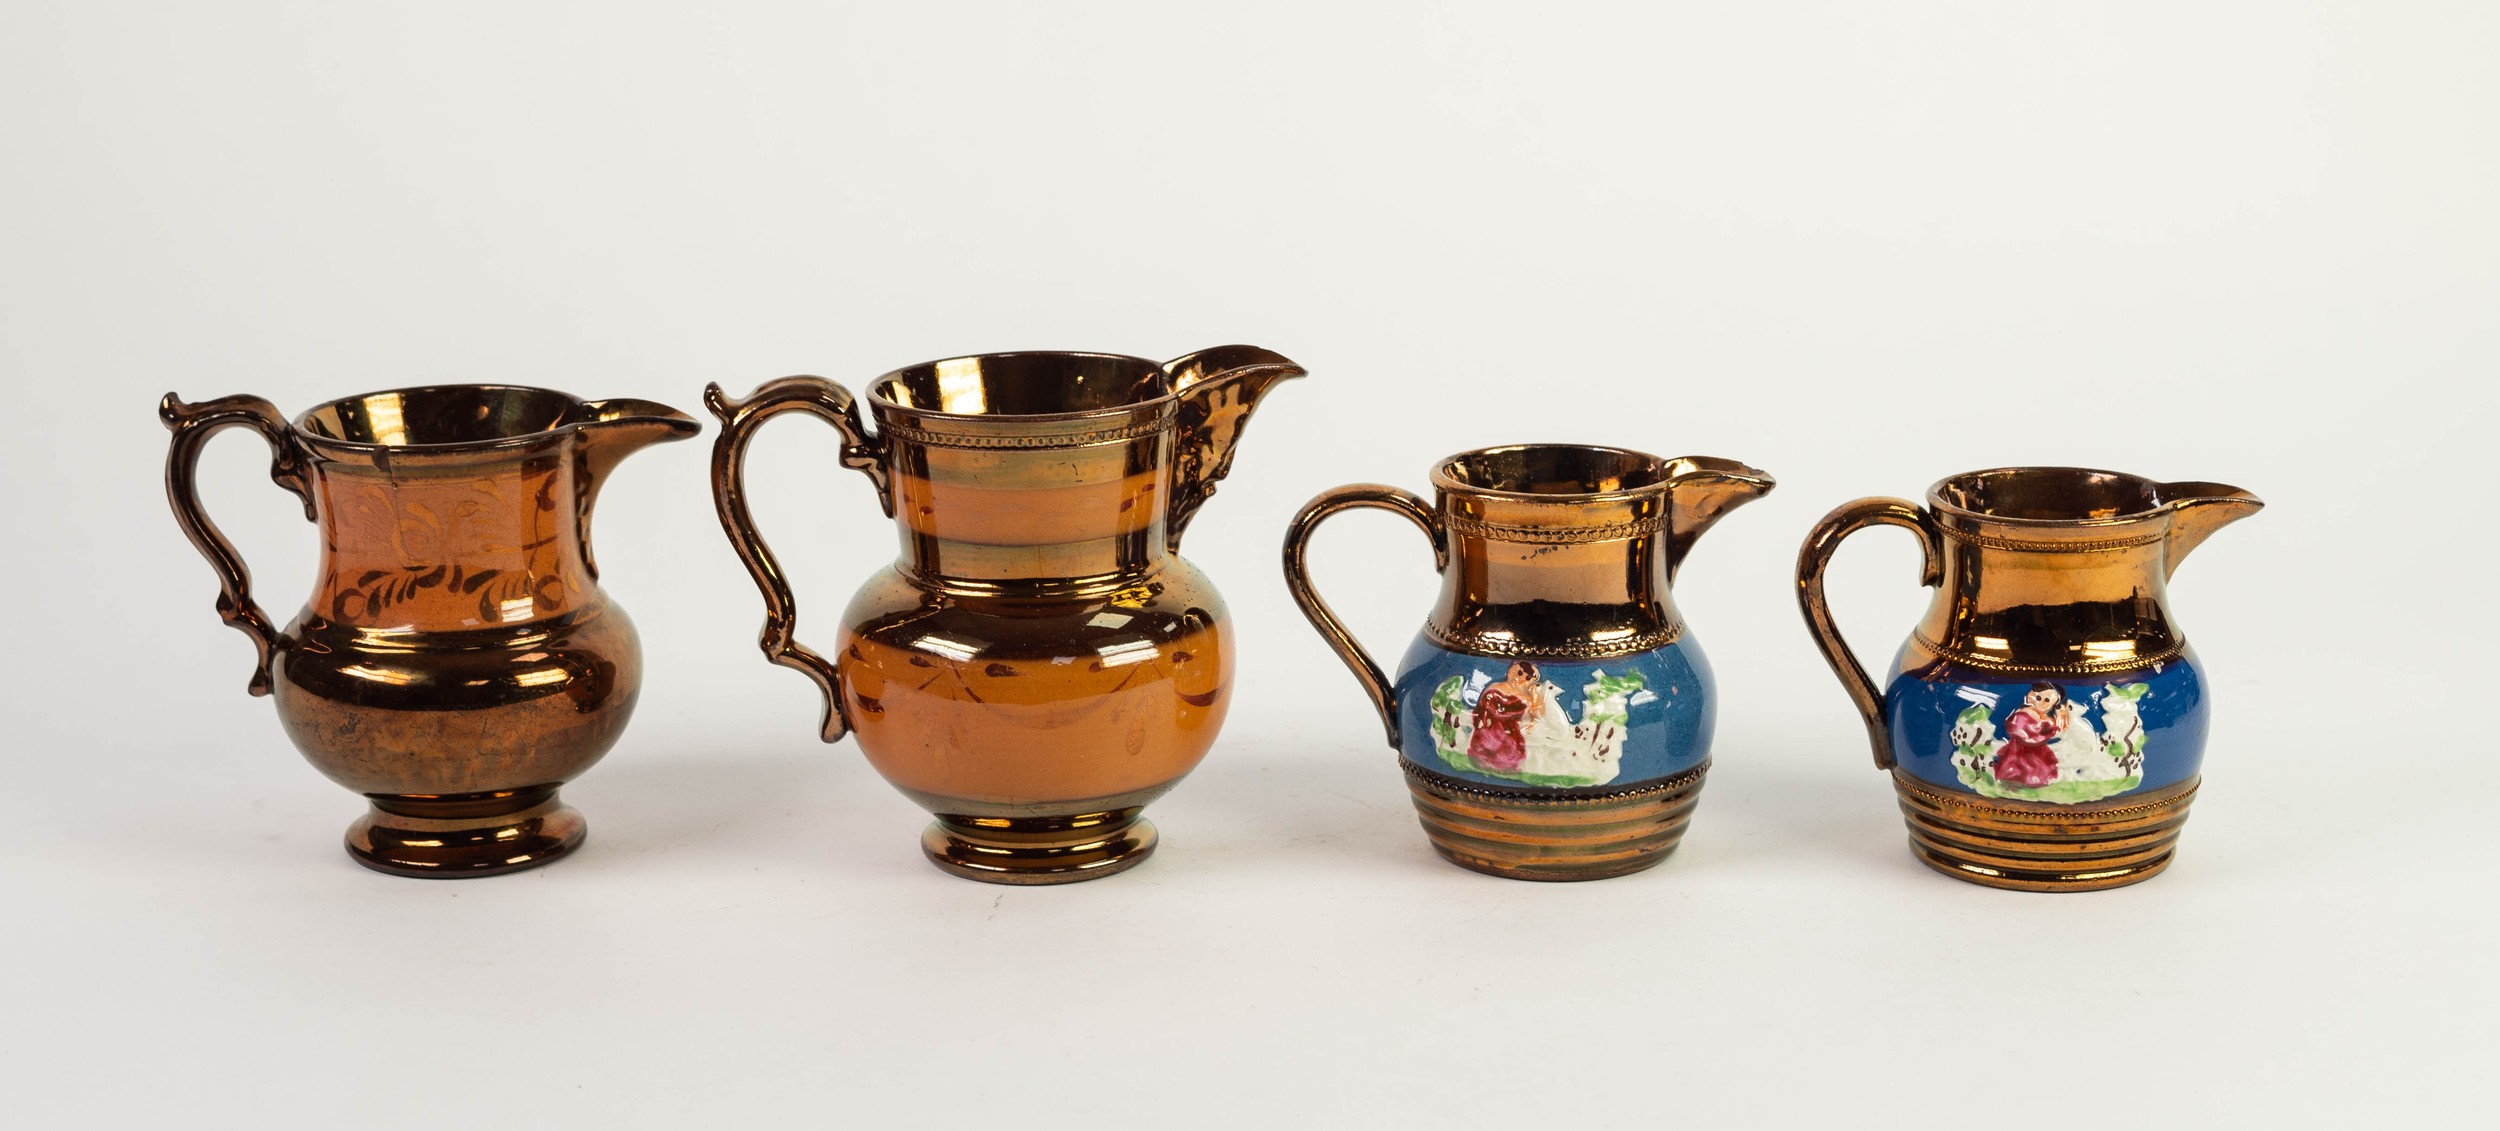 FOUR NINETEENTH CENTURY COPPER LUSTRE POTTERY JUGS, including a pair, 4 ½? (11.5cm) high ad smaller,